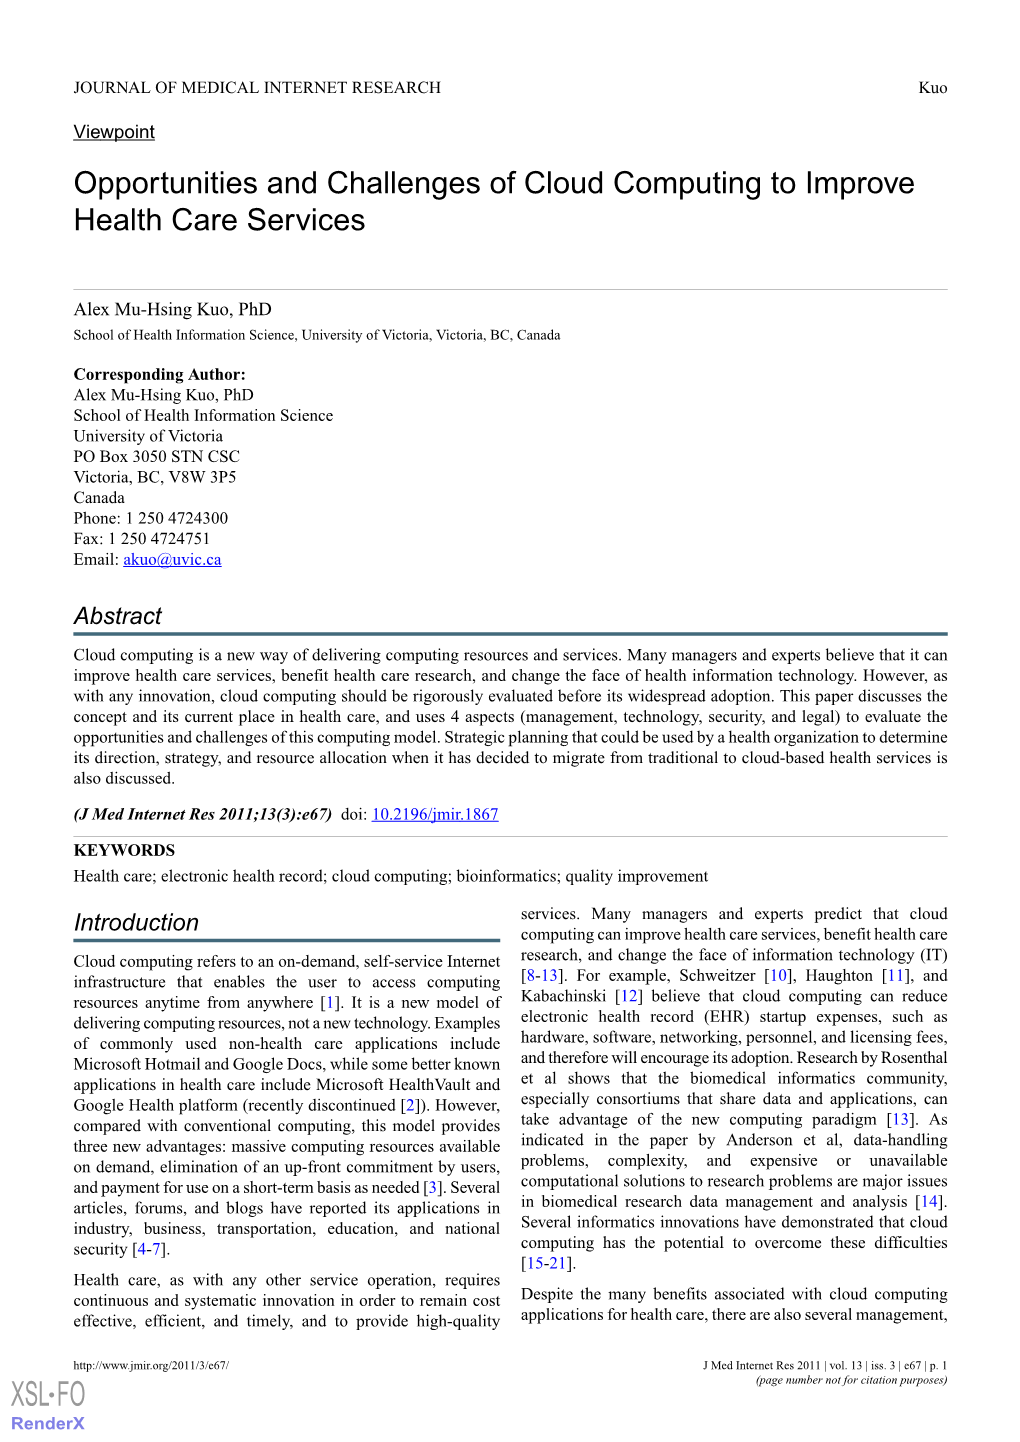 Opportunities and Challenges of Cloud Computing to Improve Health Care Services